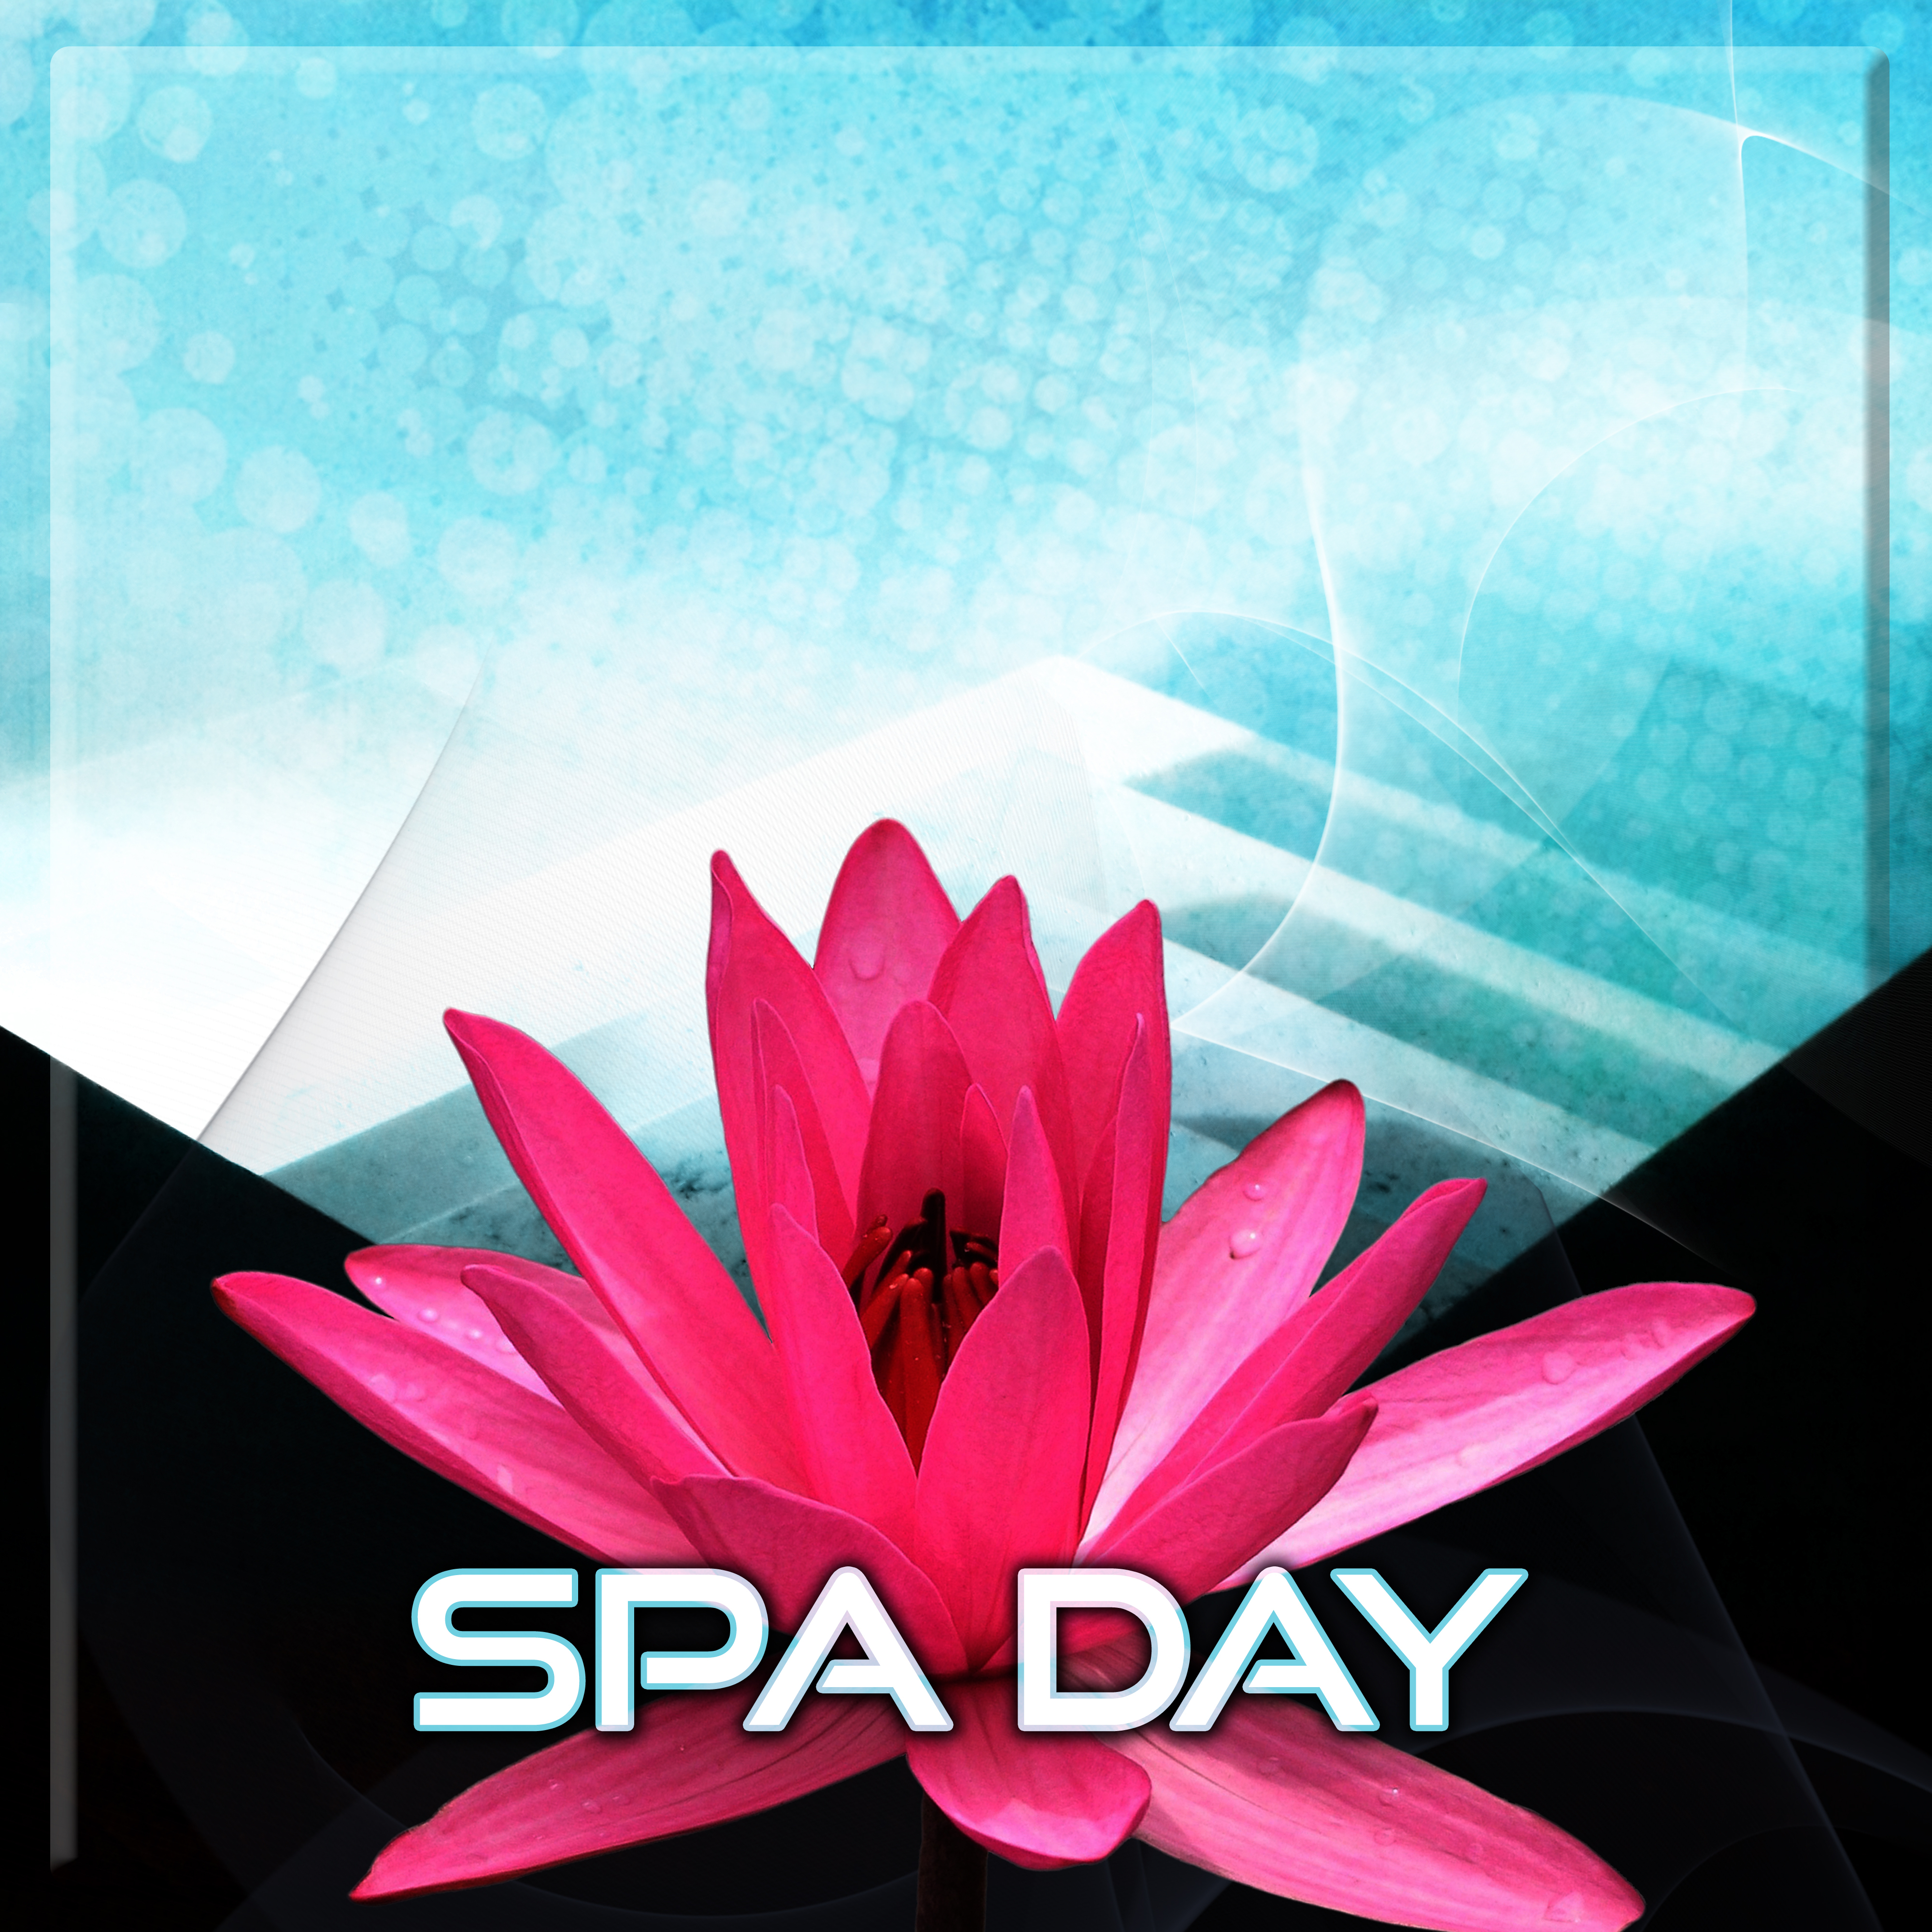 Spa Day – The Most Relaxing Spa Music for Massage & Reflexology, Shiatsu & Reiki Healing, Bath Spa with Nature Sounds, Lazy Day at Wellness Spa with Water Sounds, Aromatherapy to Destress